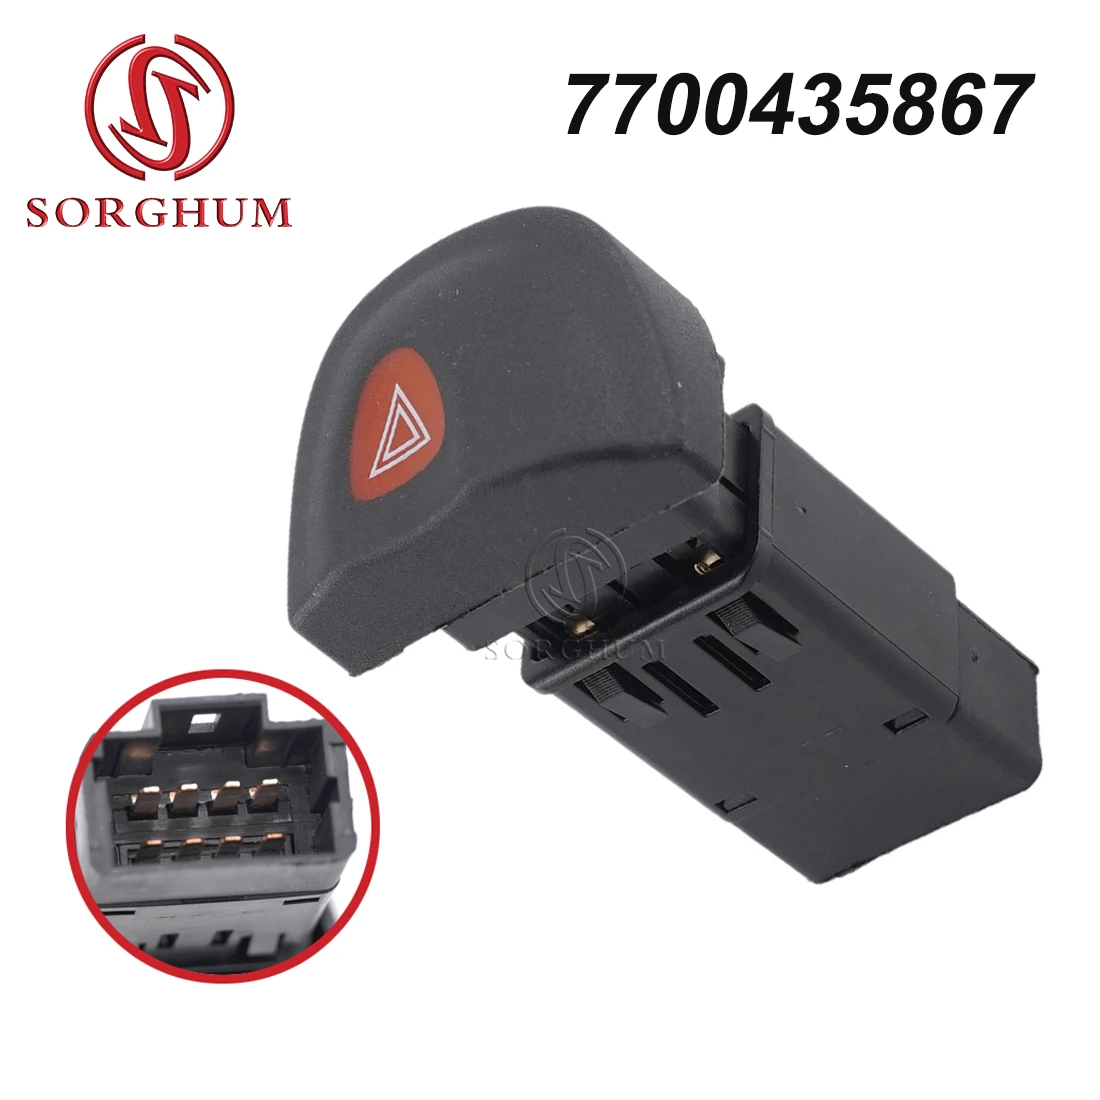 

SORGHUM Car Accessories 8Pins Toggle Hazard Warning Switch Double Flash Lights Button For Renault Megane I MK1 95-03 7700435867